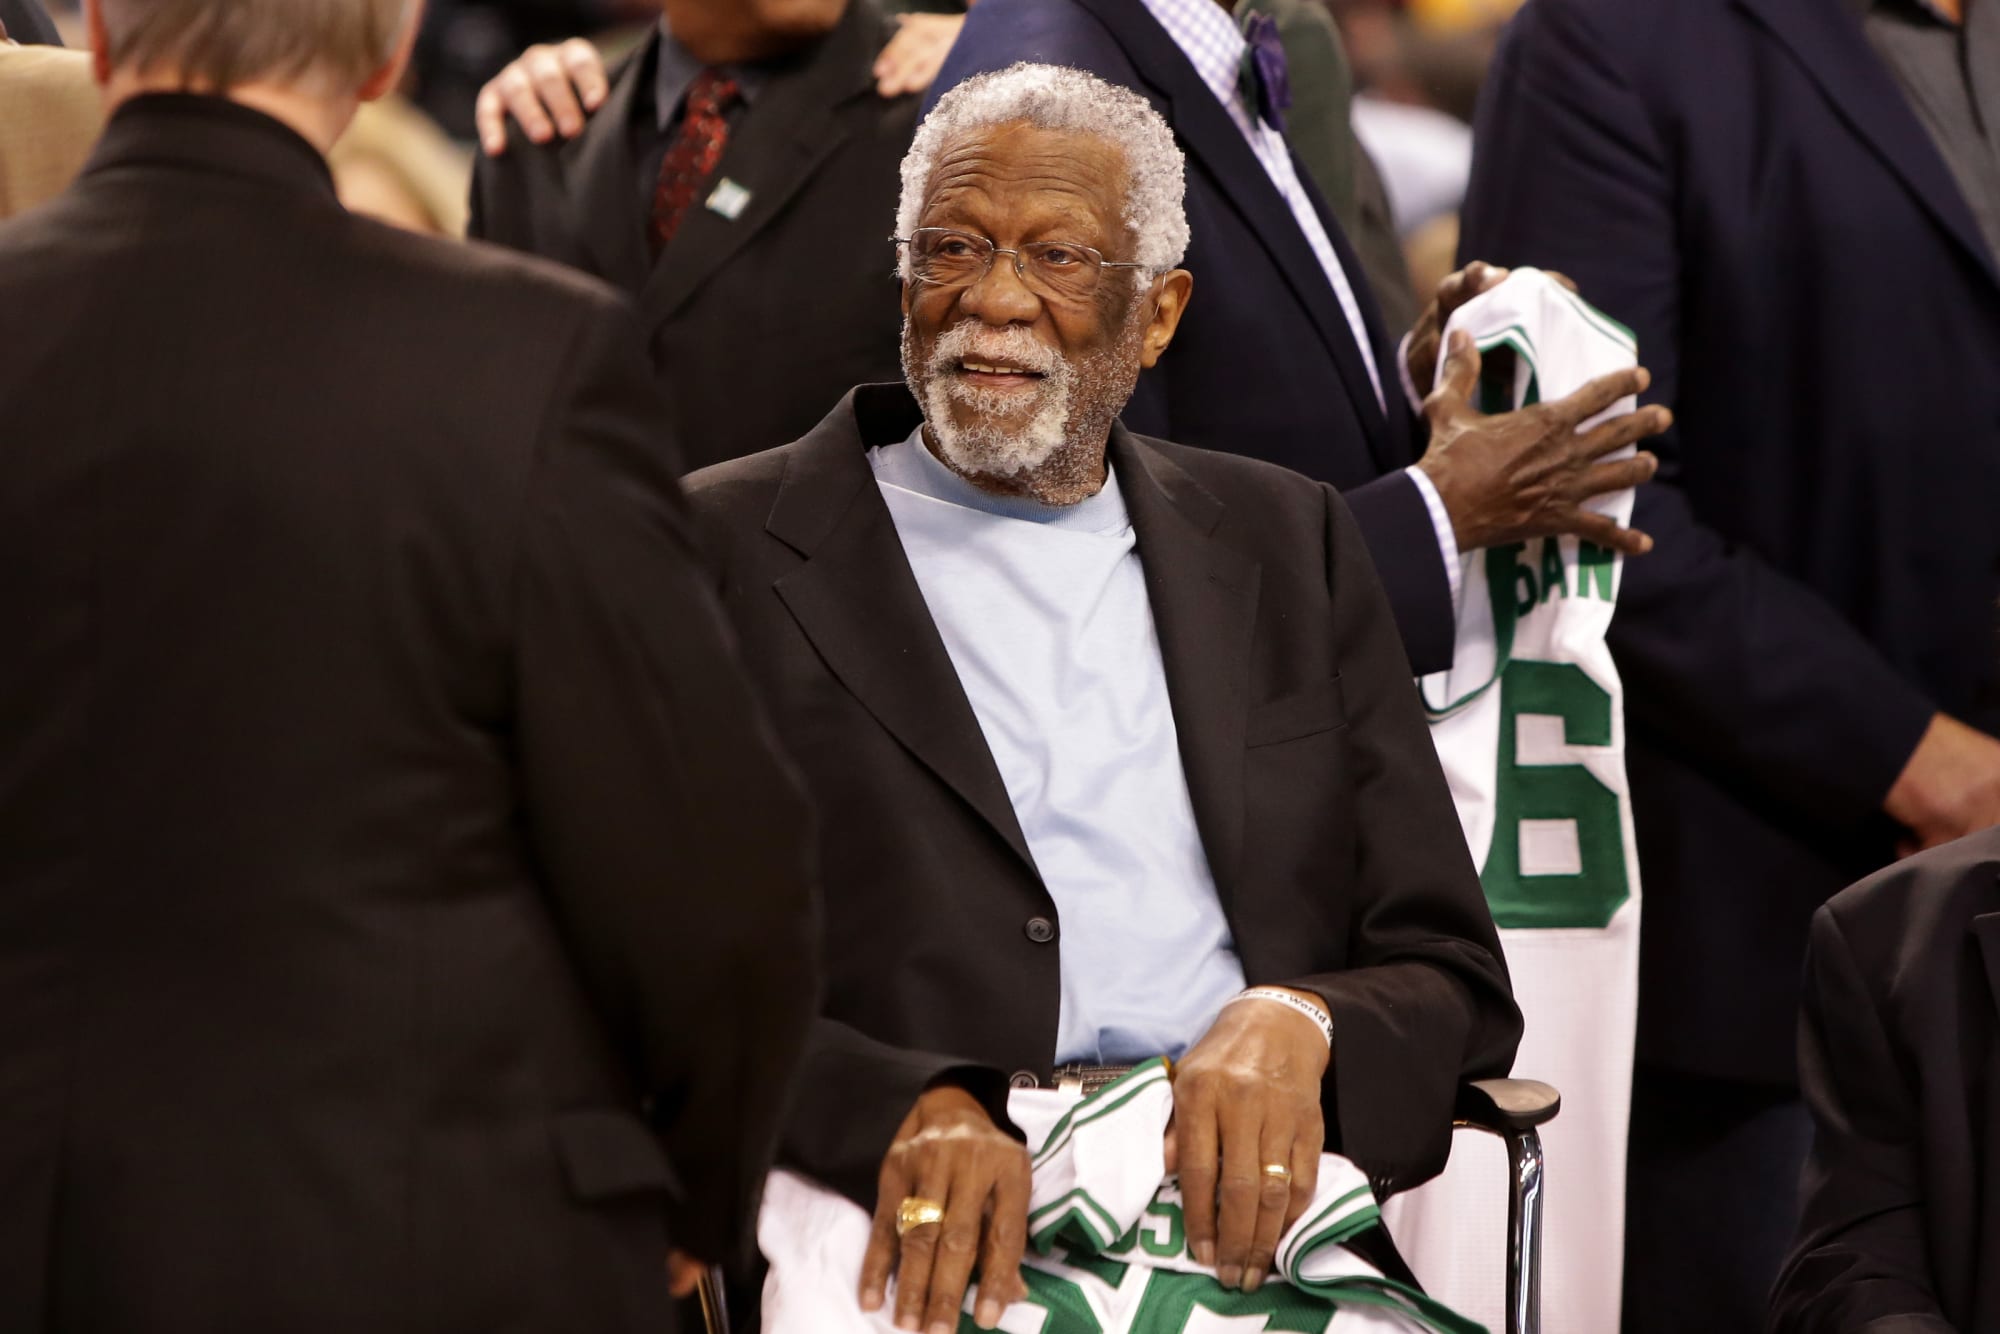 Celtics legend Invoice Russell isn’t giving up on hope for Banner 18 in 2023